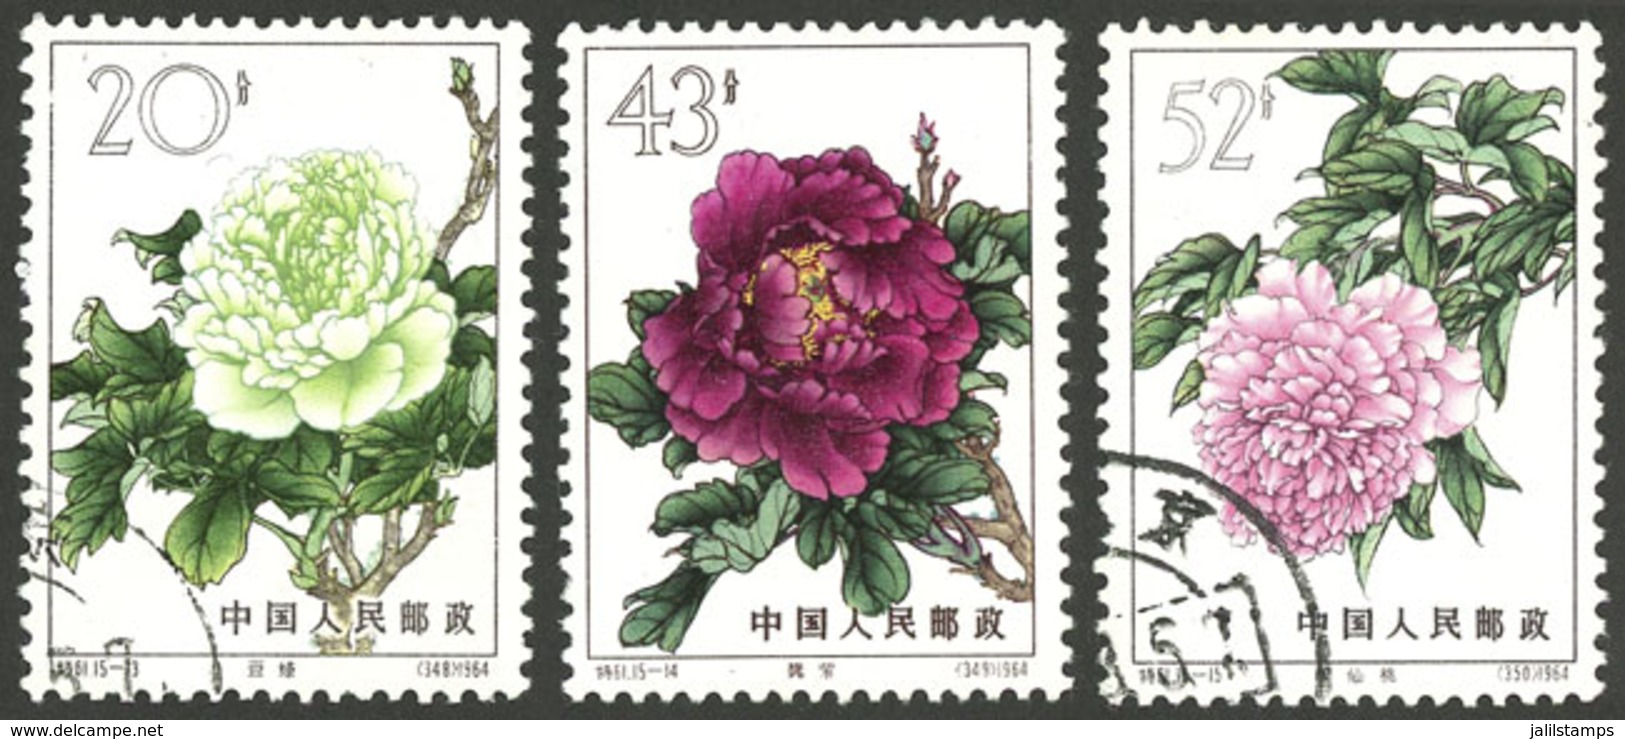 CHINA: Sc.779/781, 1964 Chrysanthemum, The 3 High Values Of The Set, VF Quality! - Usados